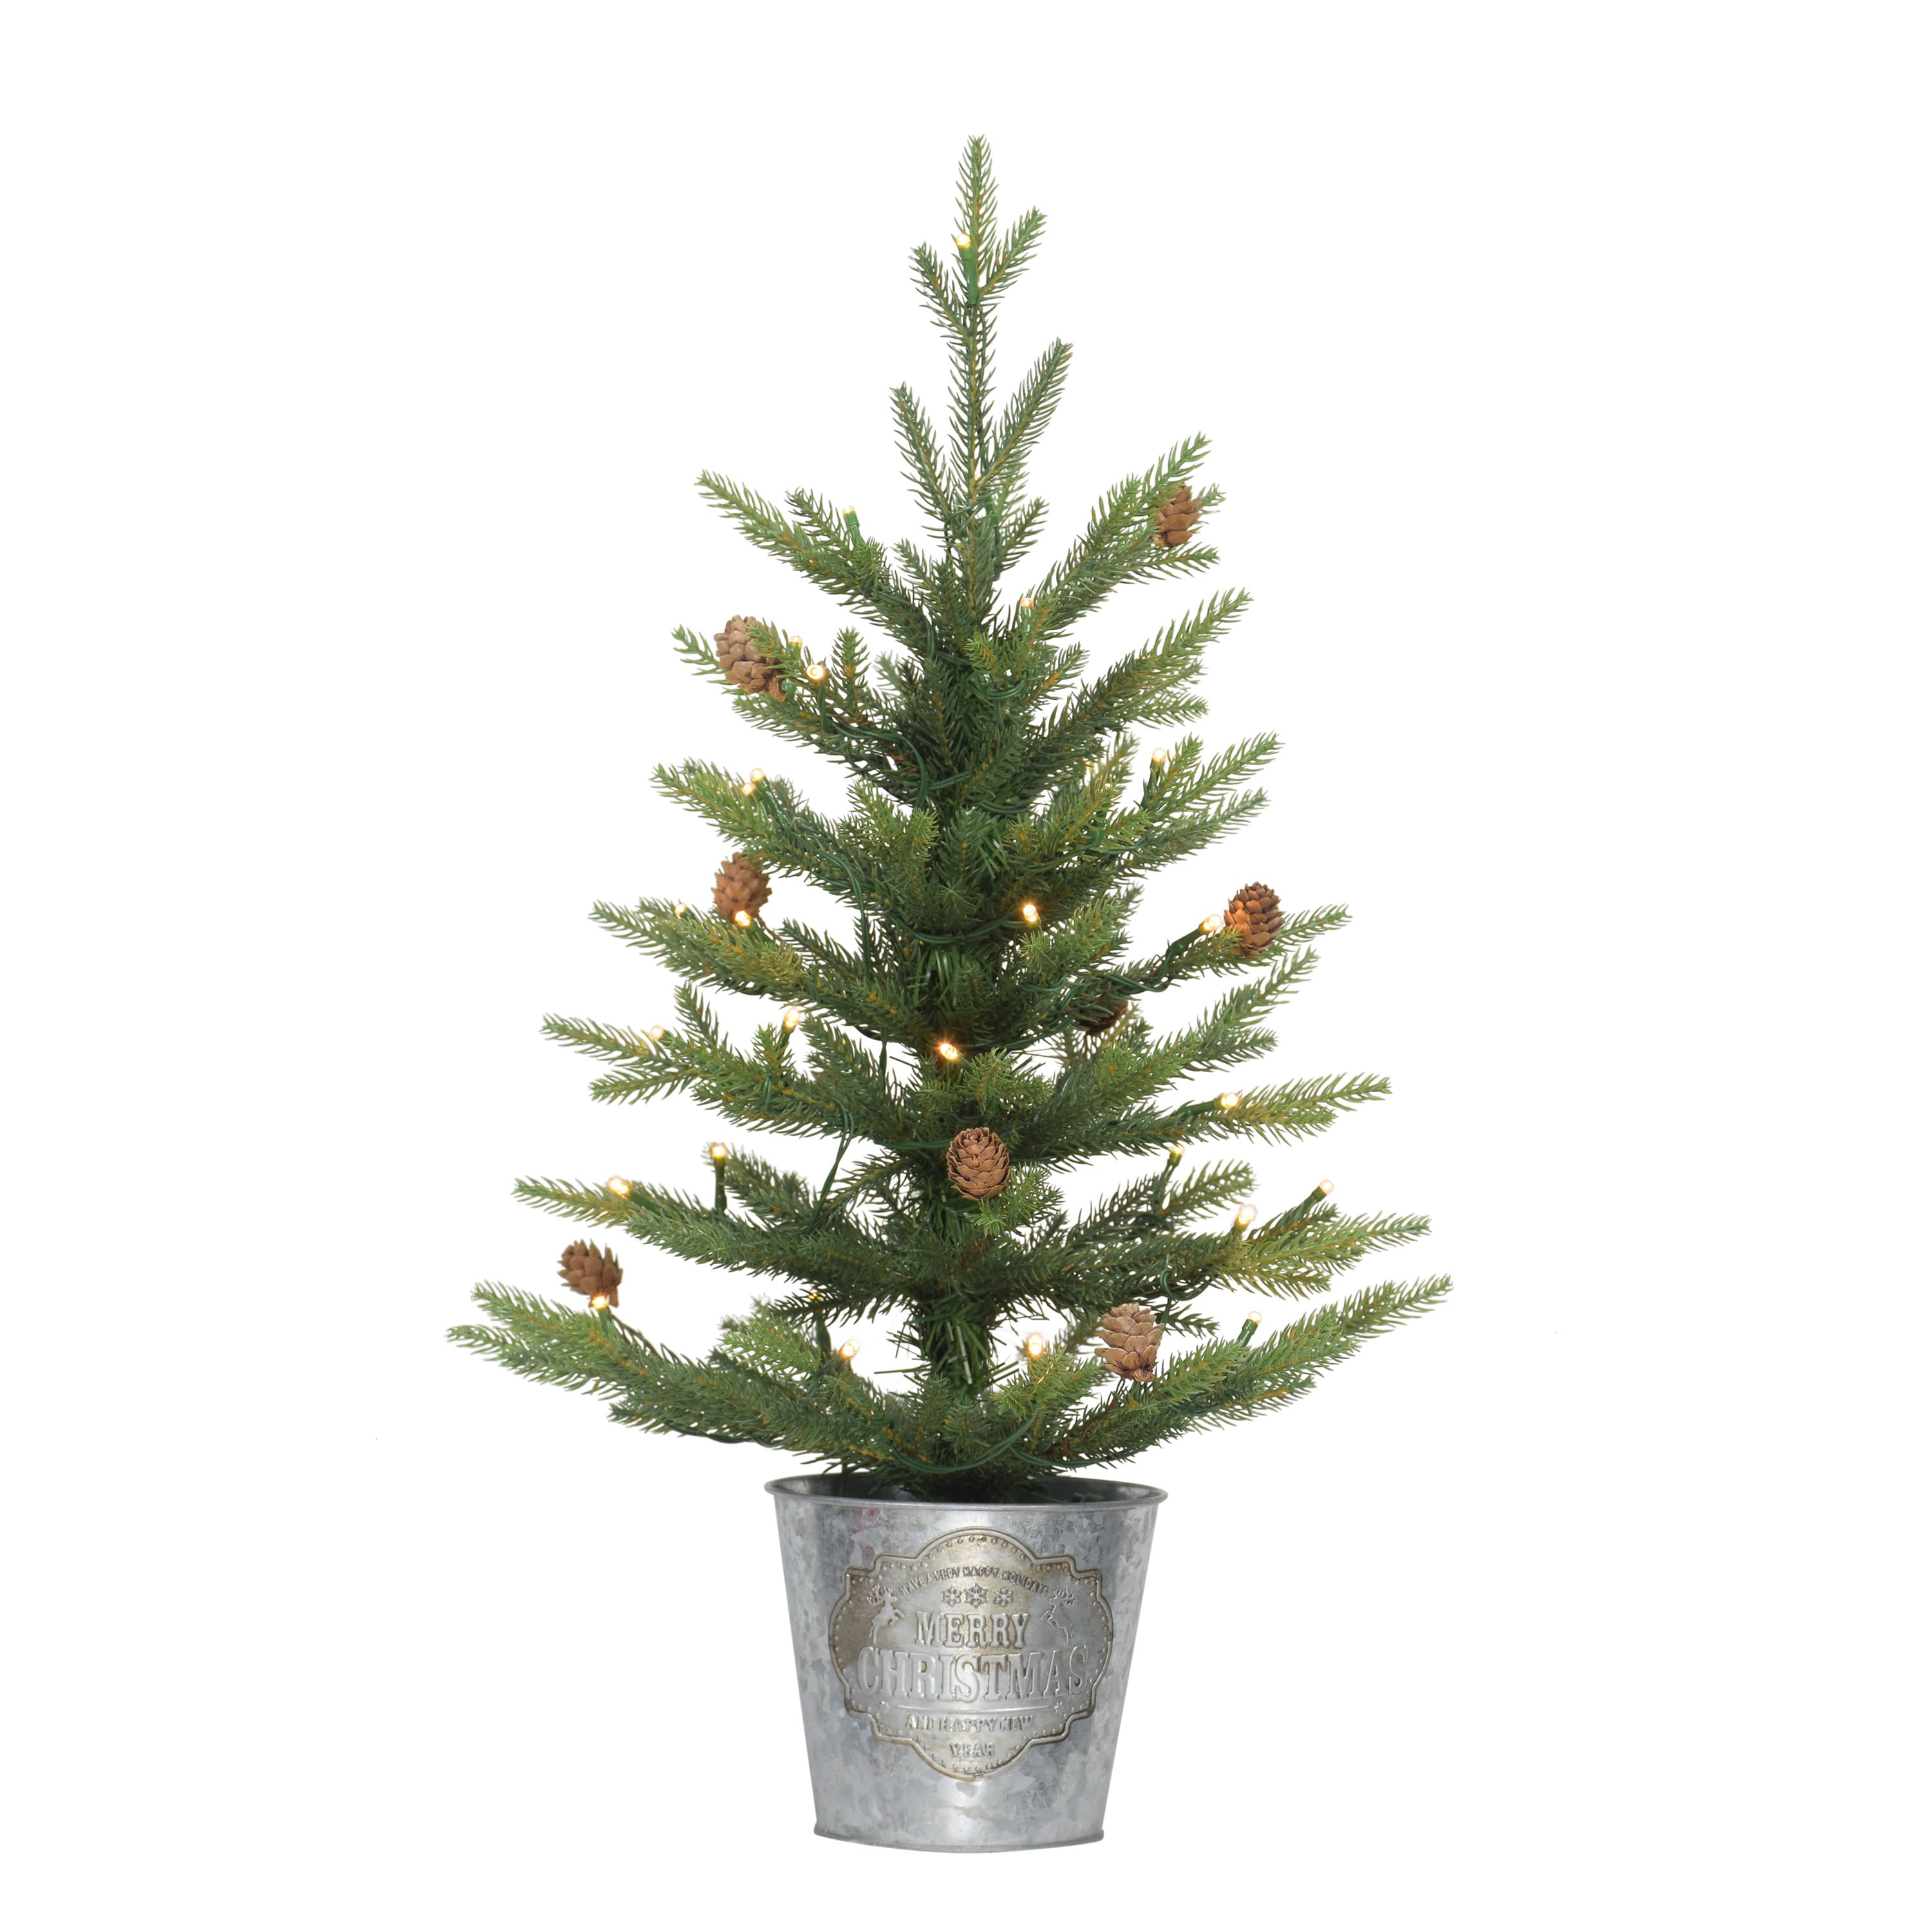 6 Pack: 2ft. Pre-Lit Artificial Christmas Tree in Metal Pot, Clear Lights